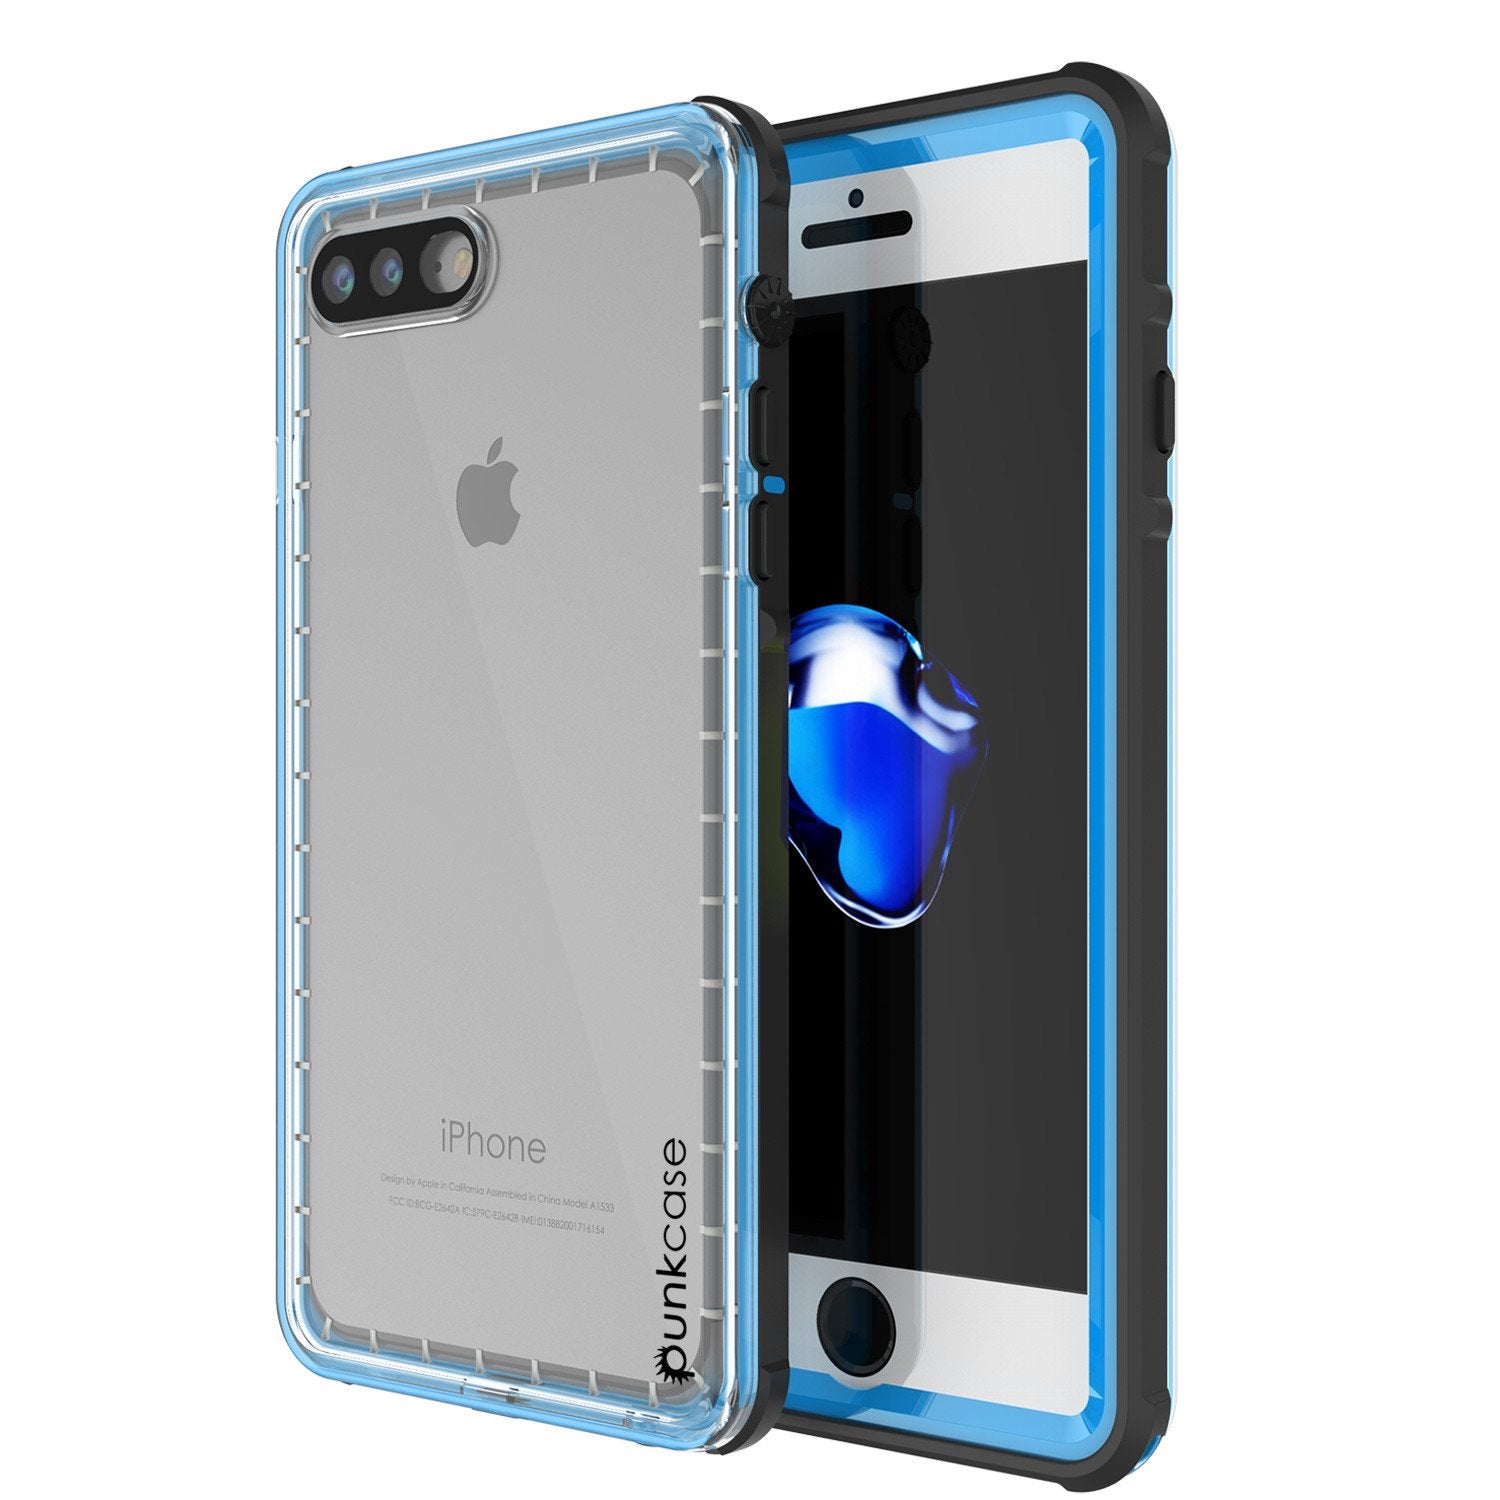 iPhone 7+ Plus Waterproof Case, PUNKcase CRYSTAL Light Blue  W/ Attached Screen Protector  | Warranty - PunkCase NZ